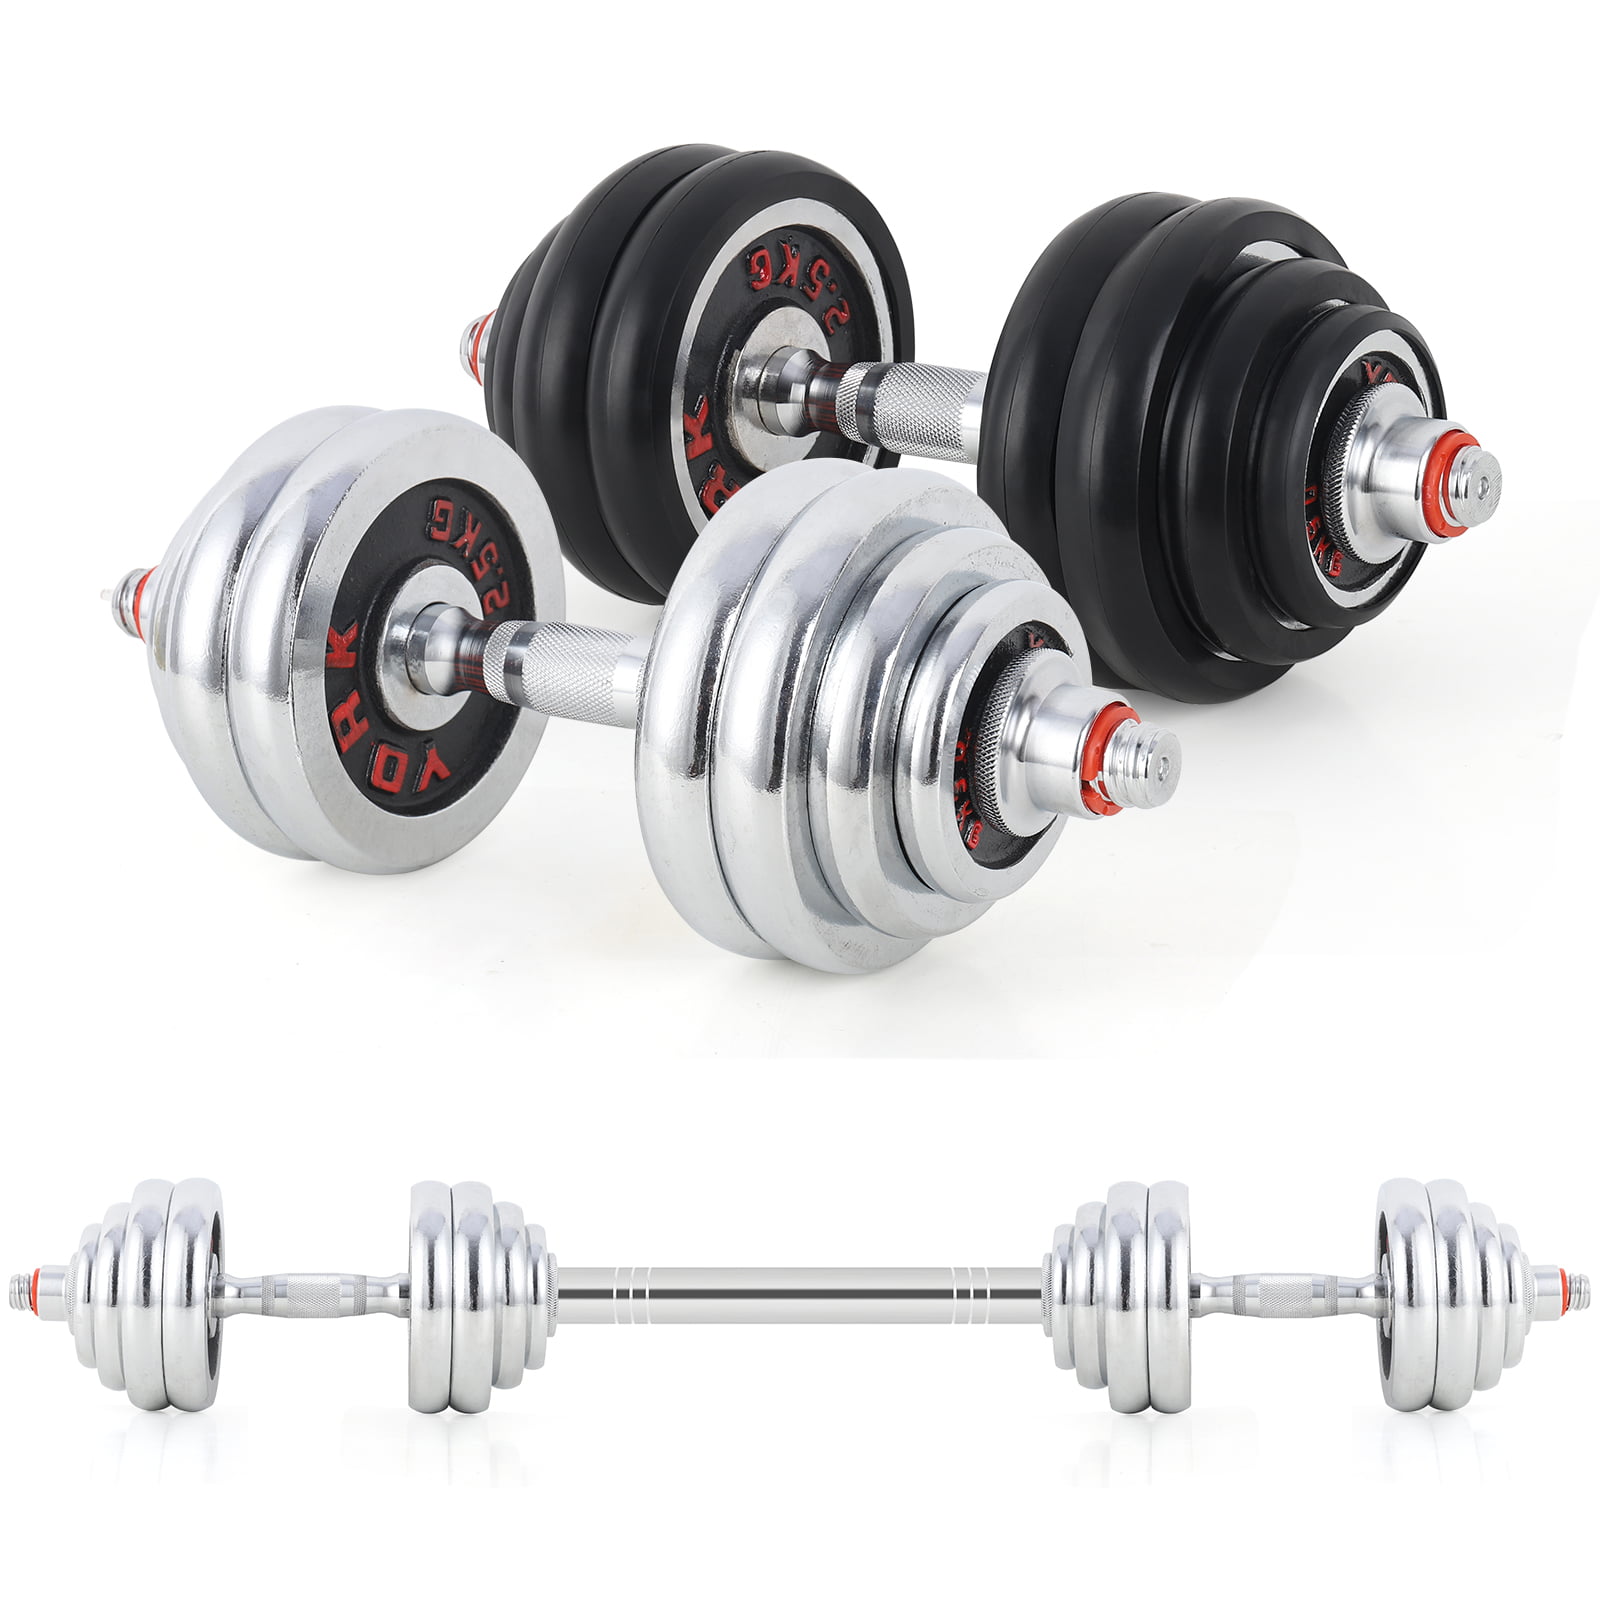 Adjustable Weights Dumbbells Set Silver 66LBS Free Weights Dumbbells with Connecting Rod Used As Barbell for Gym Work Out Home Training Suitable for Men and Women